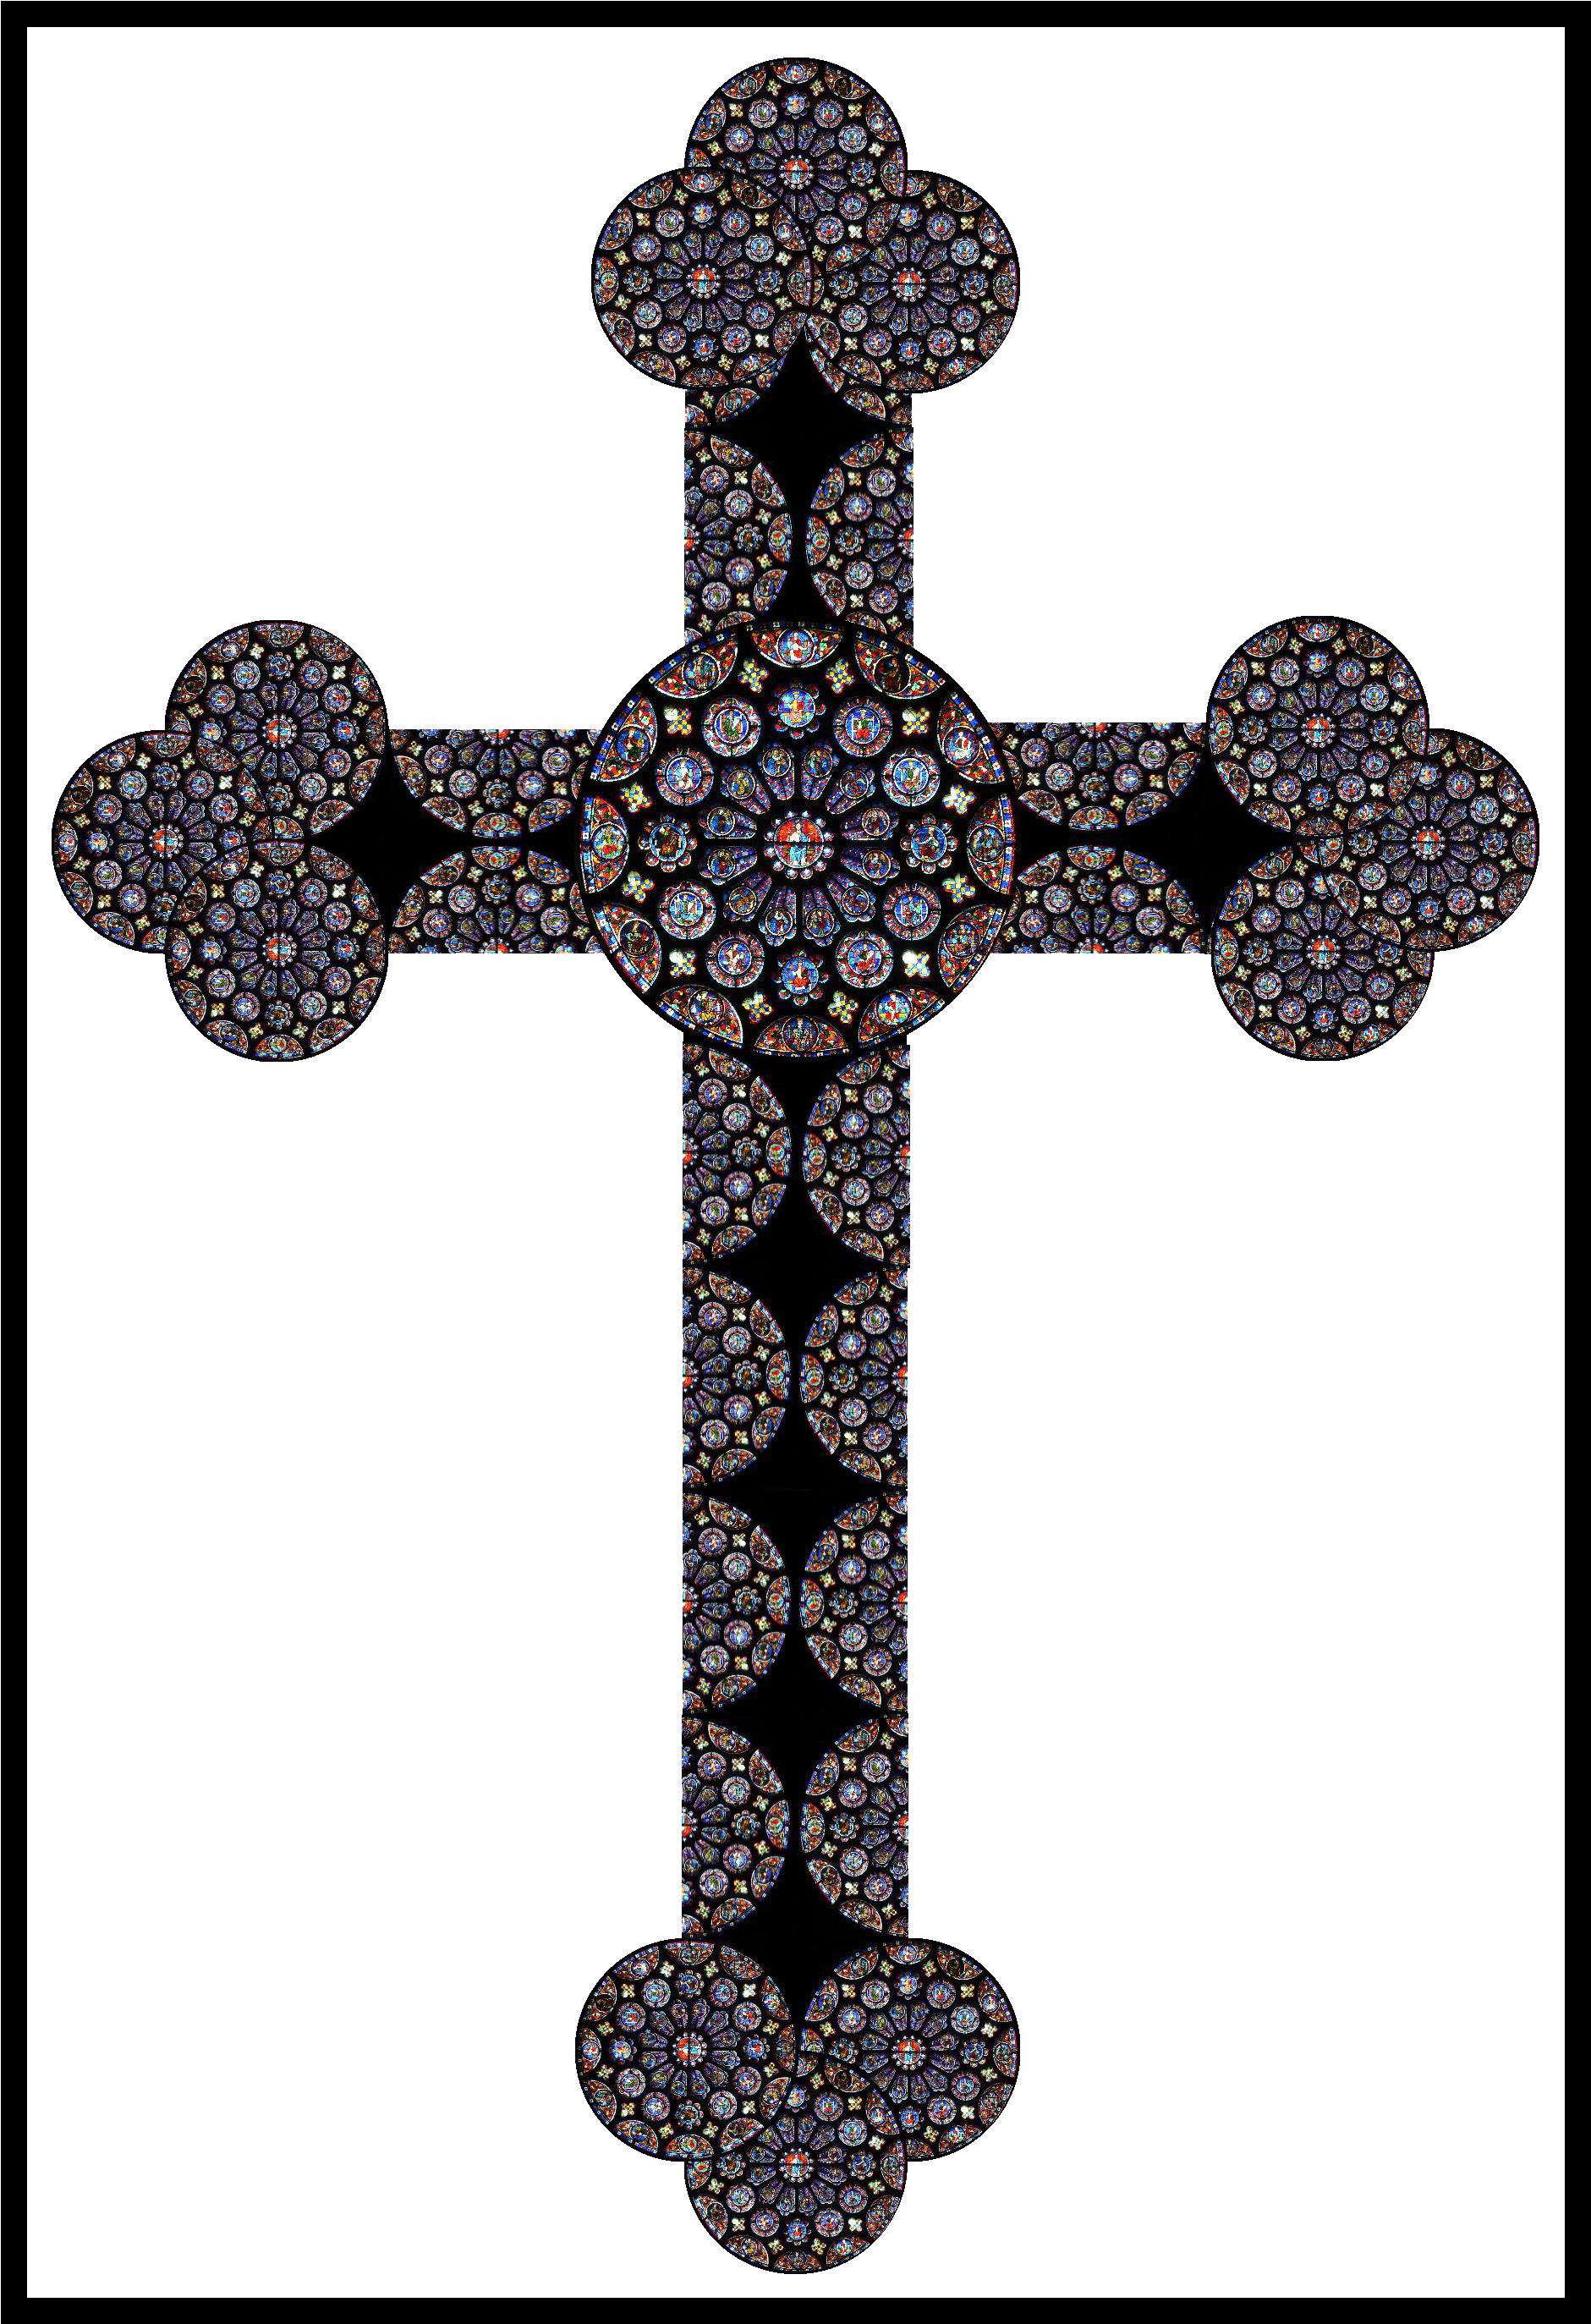 Ornate Stained Glass Cross Design PNG